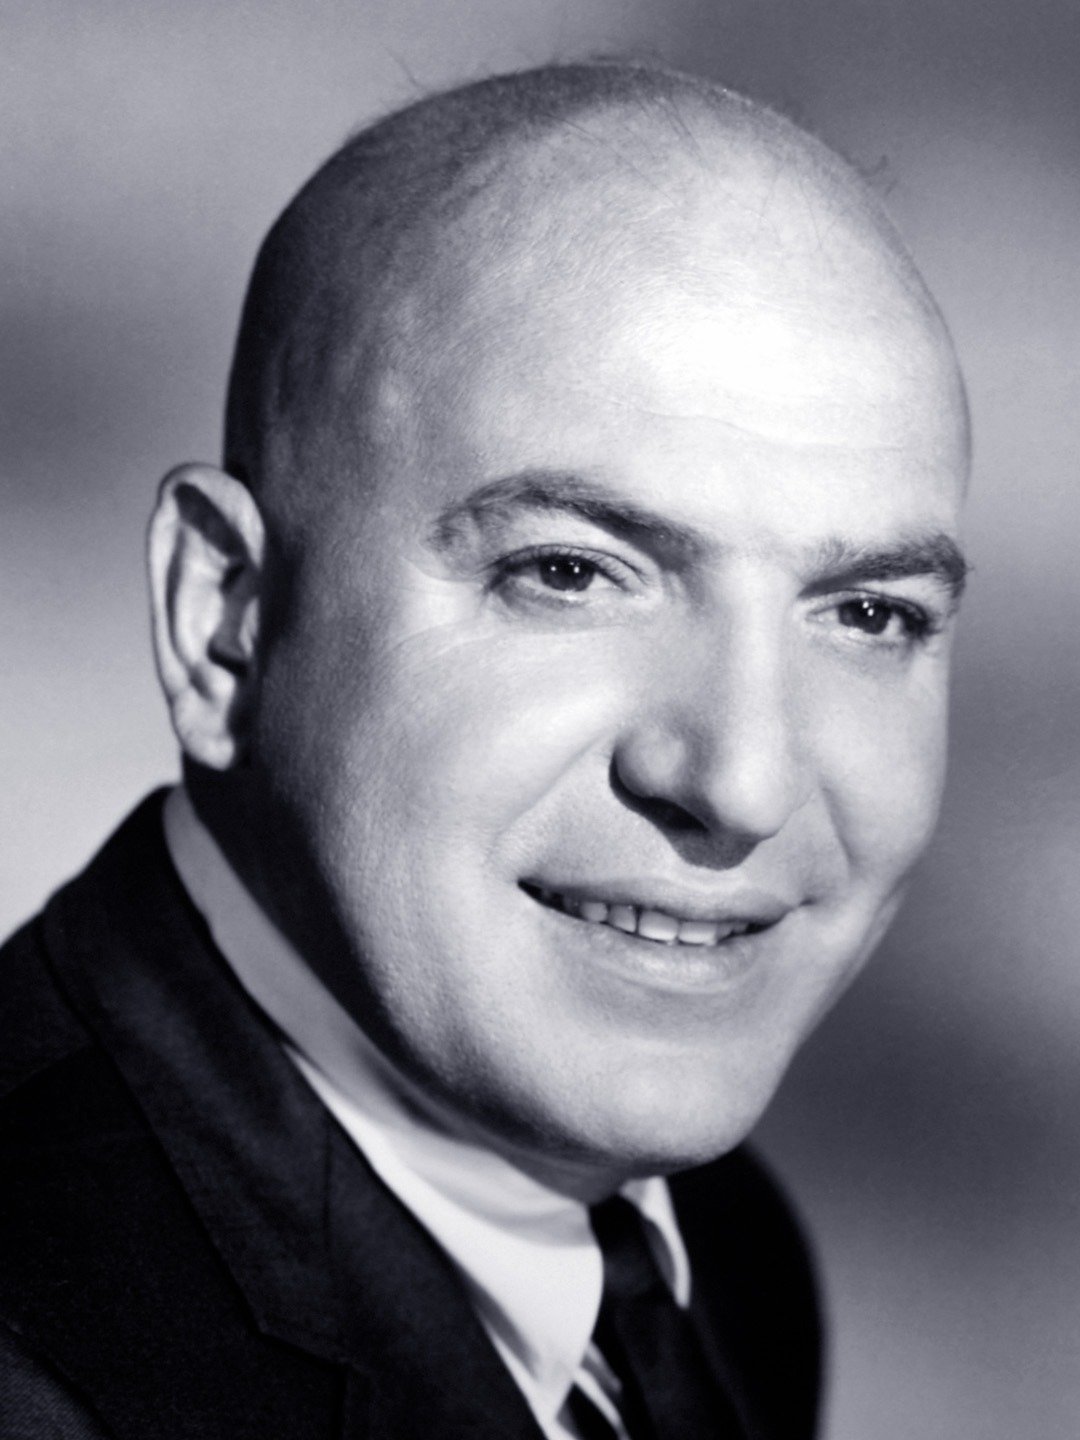 How tall is Telly Savalas?